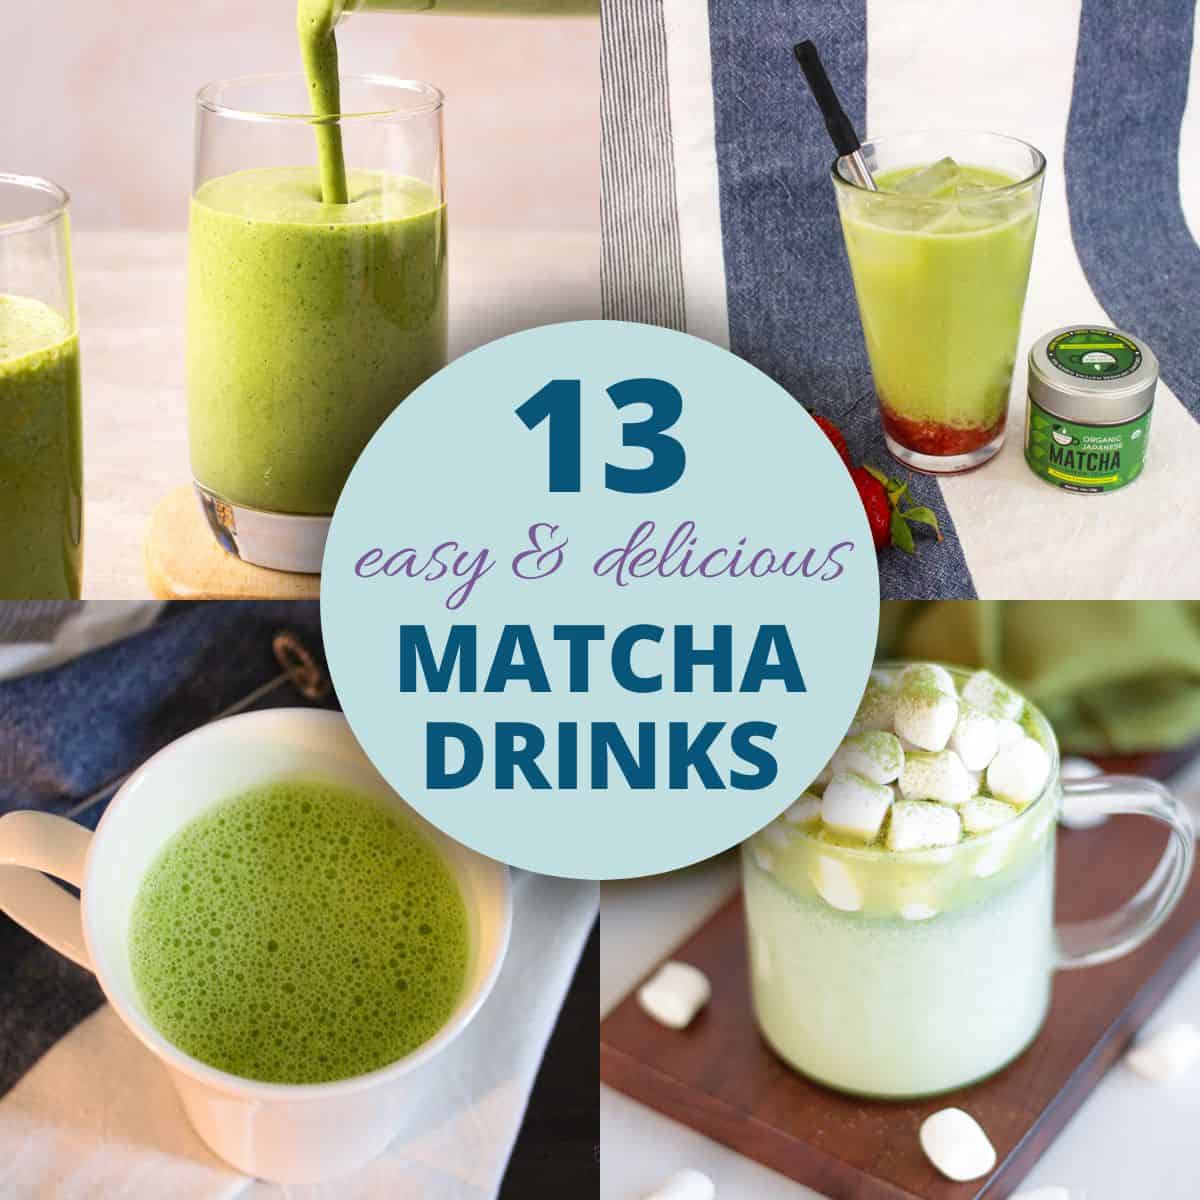 4 matcha based beverage photos in a collage with text in the middle reading "13 easy & delicious matcha drinks"